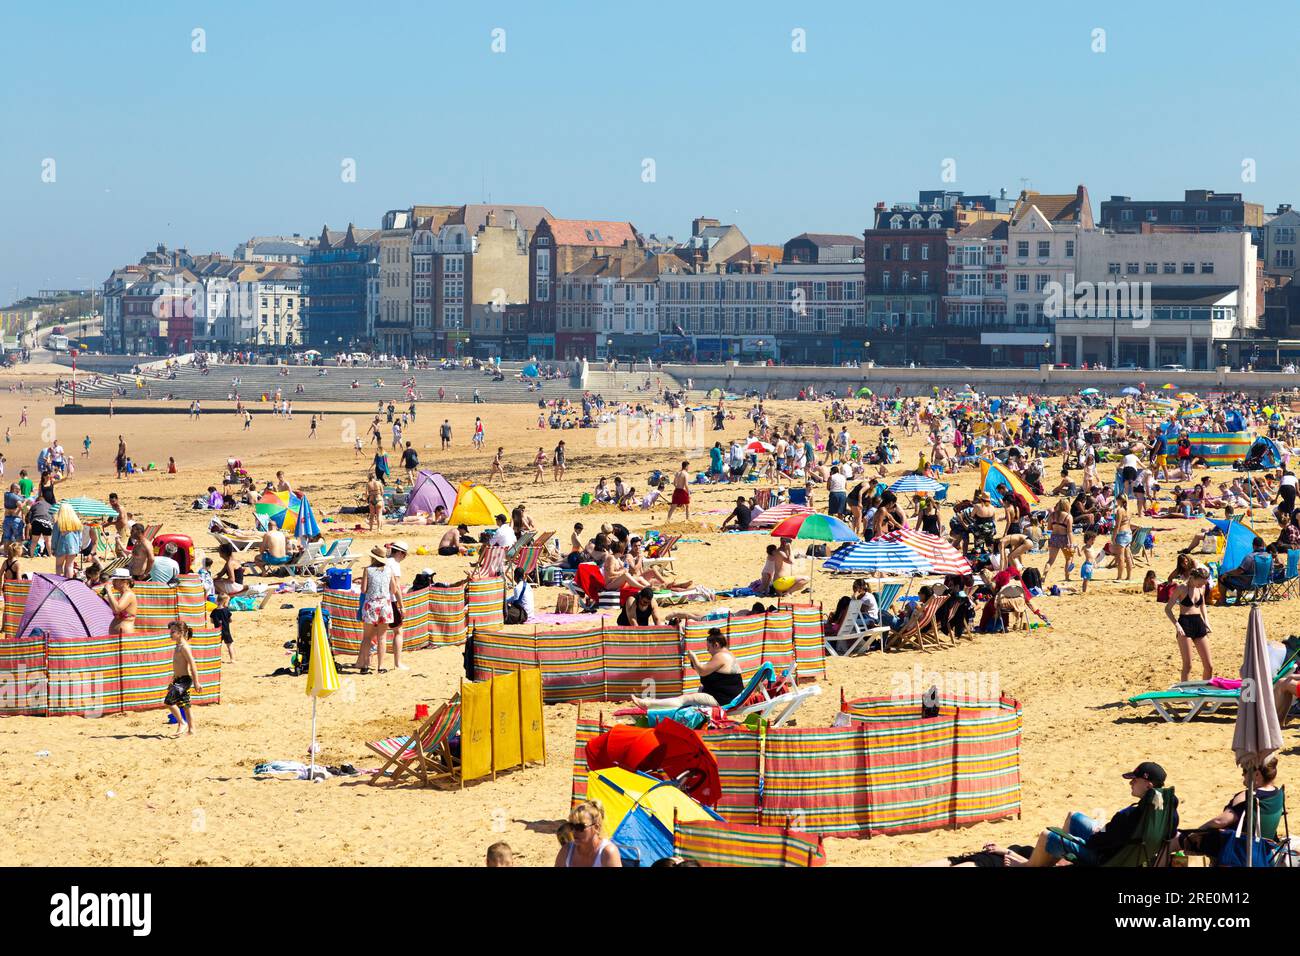 Crowded beach on a hot Bank Holiday weekend in Margate, London, UK Stock Photo